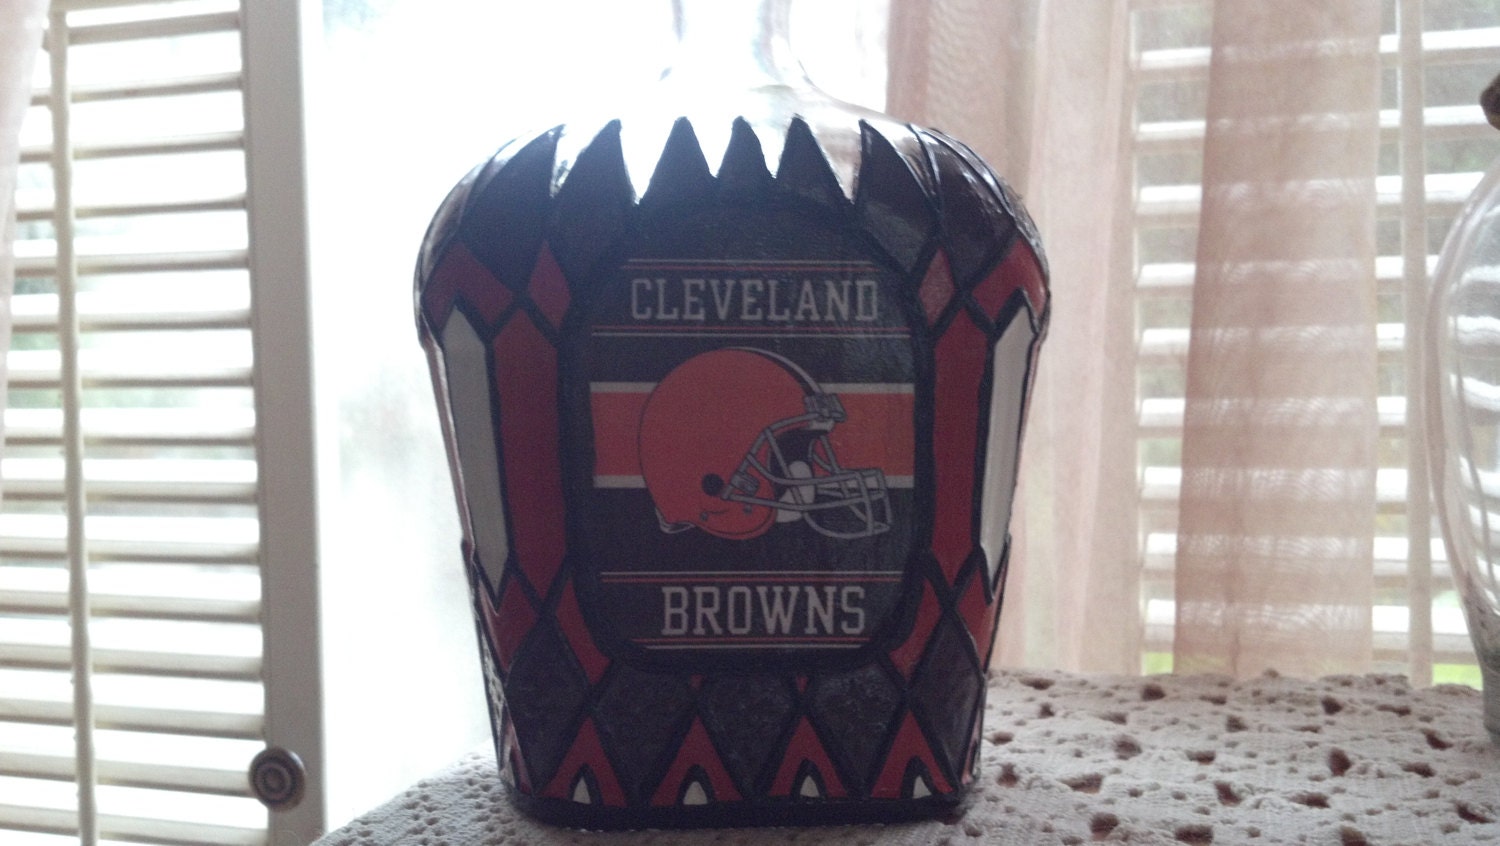 Cleveland Browns Football Crown Royal Hand Painted glass